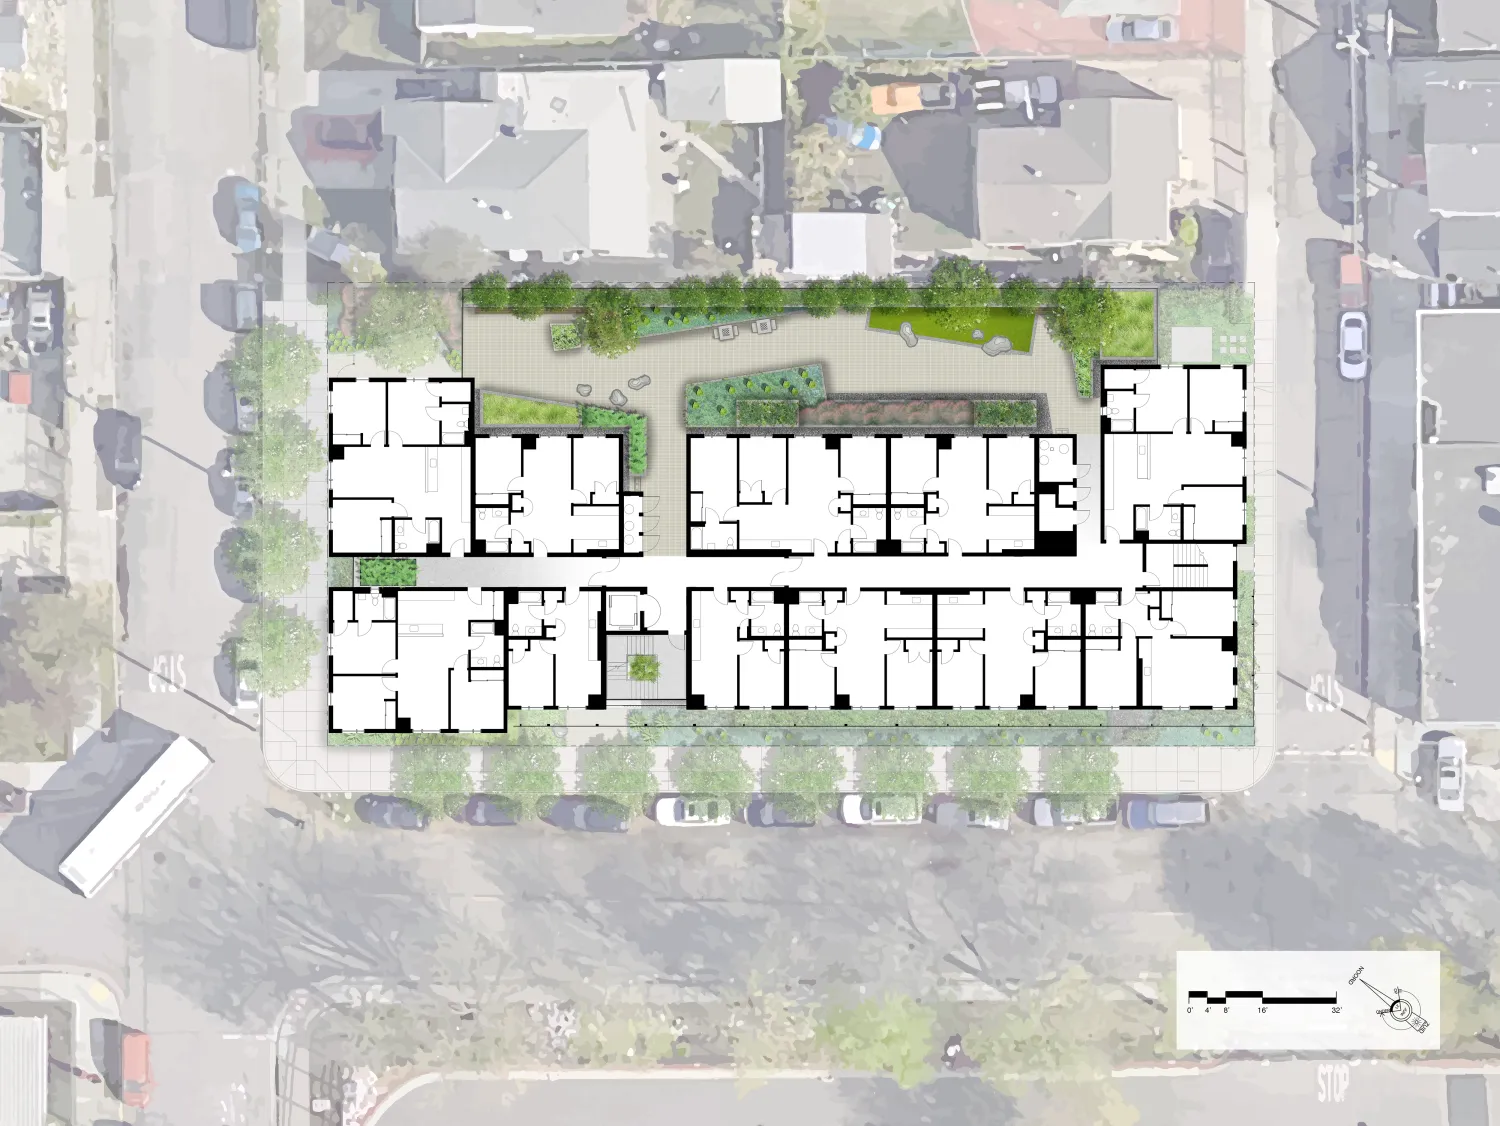 Second level site plan for Coliseum Place, affordable housing in Oakland, Ca.